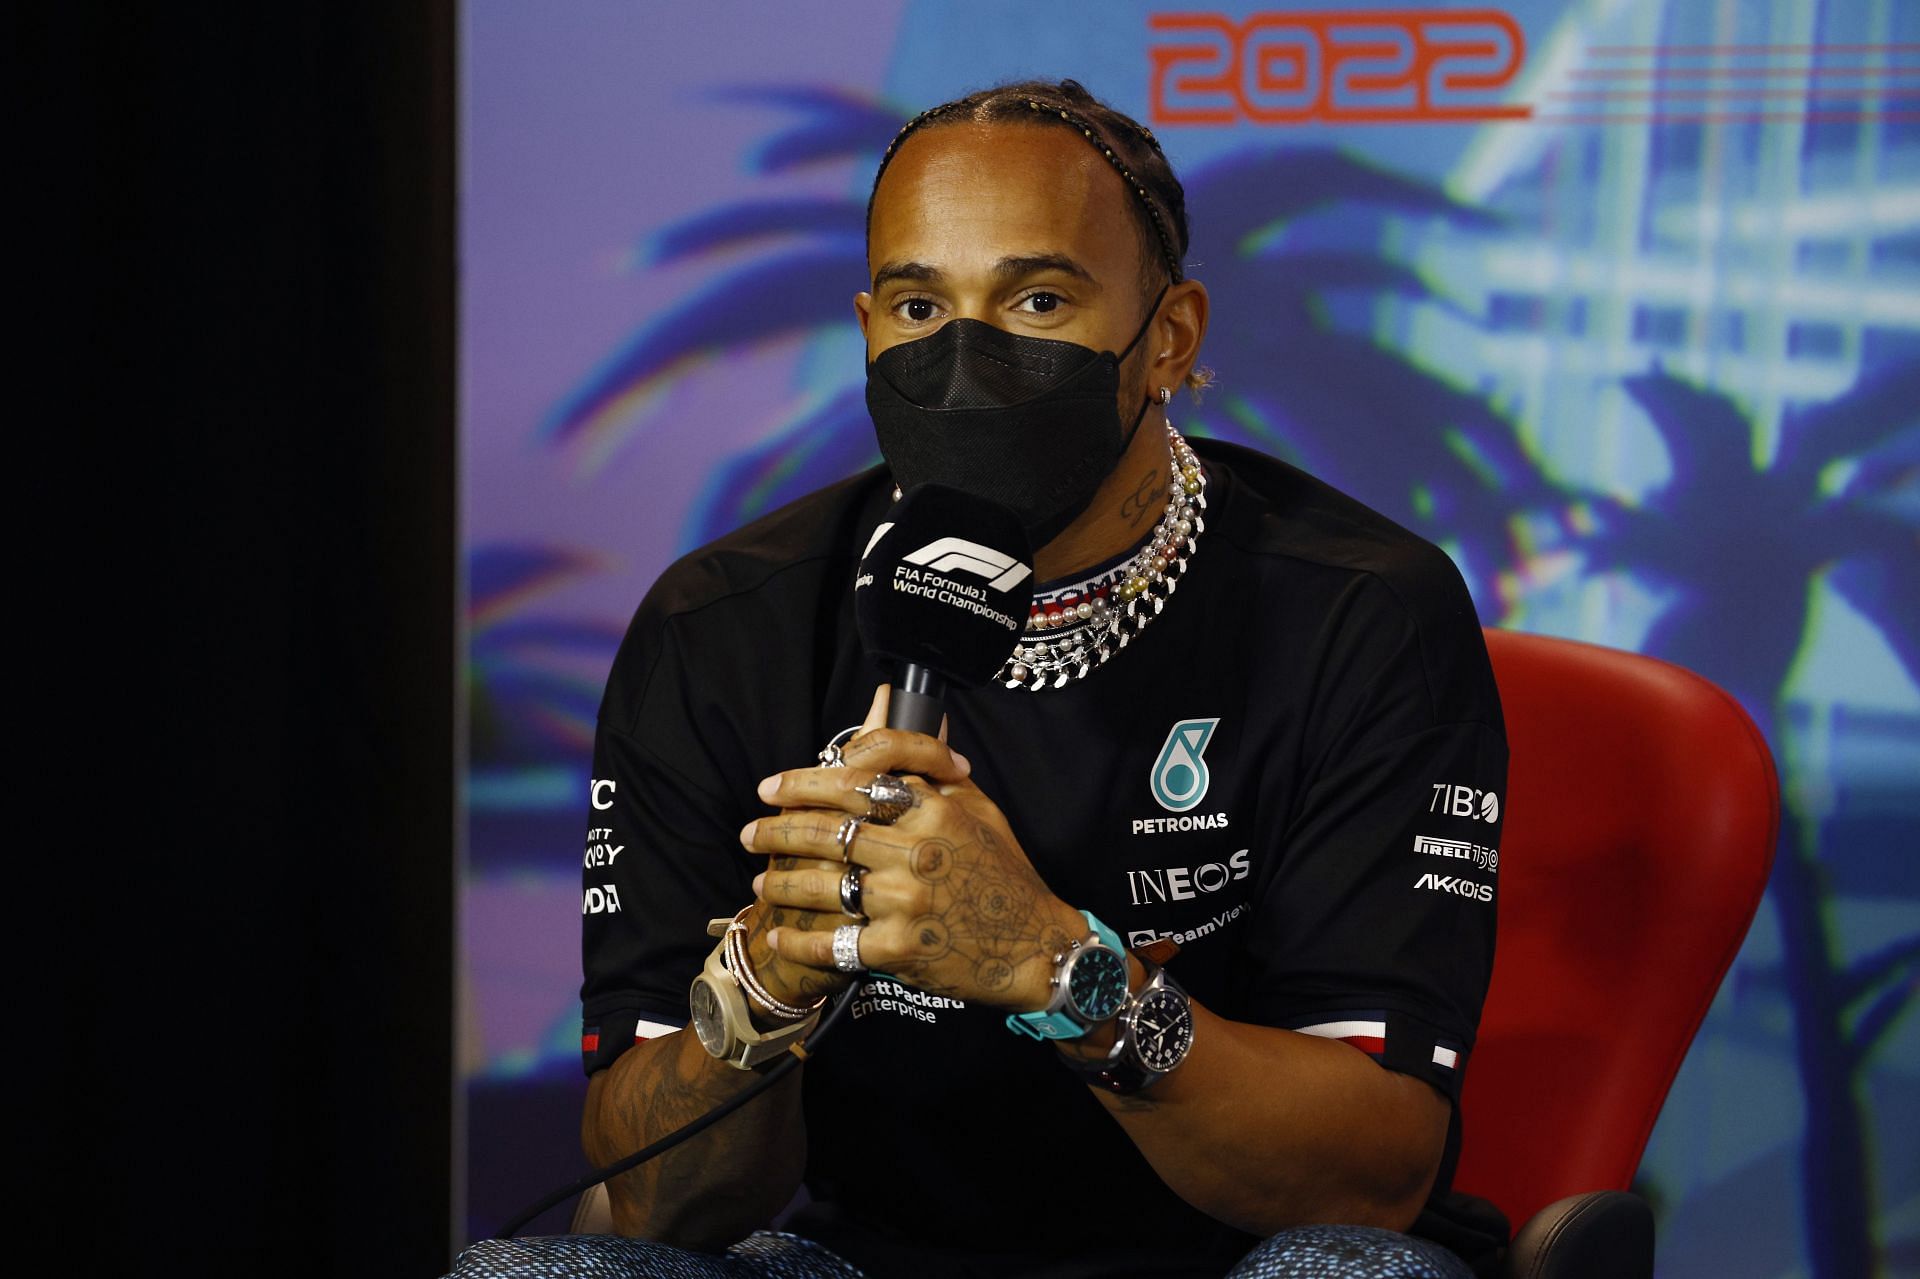 Lewis Hamilton decked out in his jewelry during the F1 Grand Prix of Miami